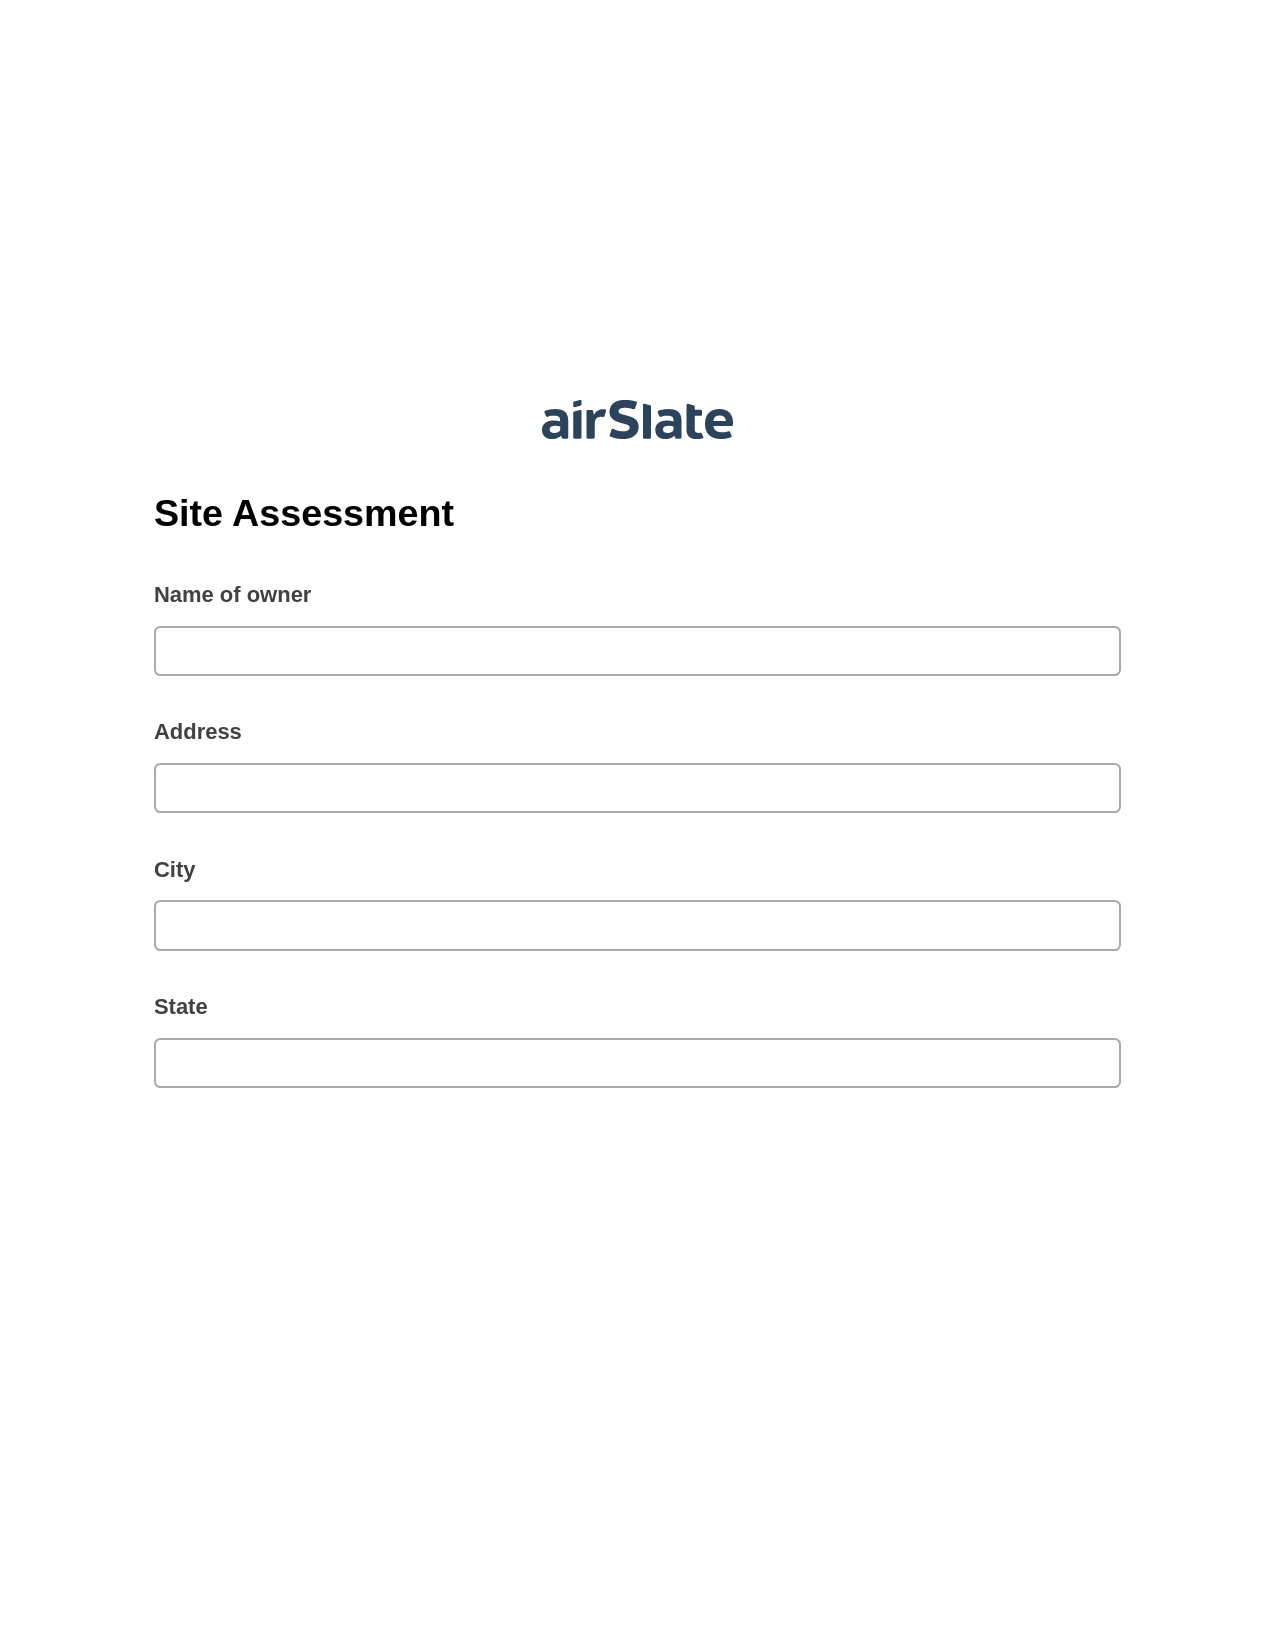 Site Assessment Pre-fill from CSV File Bot, Lock the slate bot, Text Message Notification Postfinish Bot